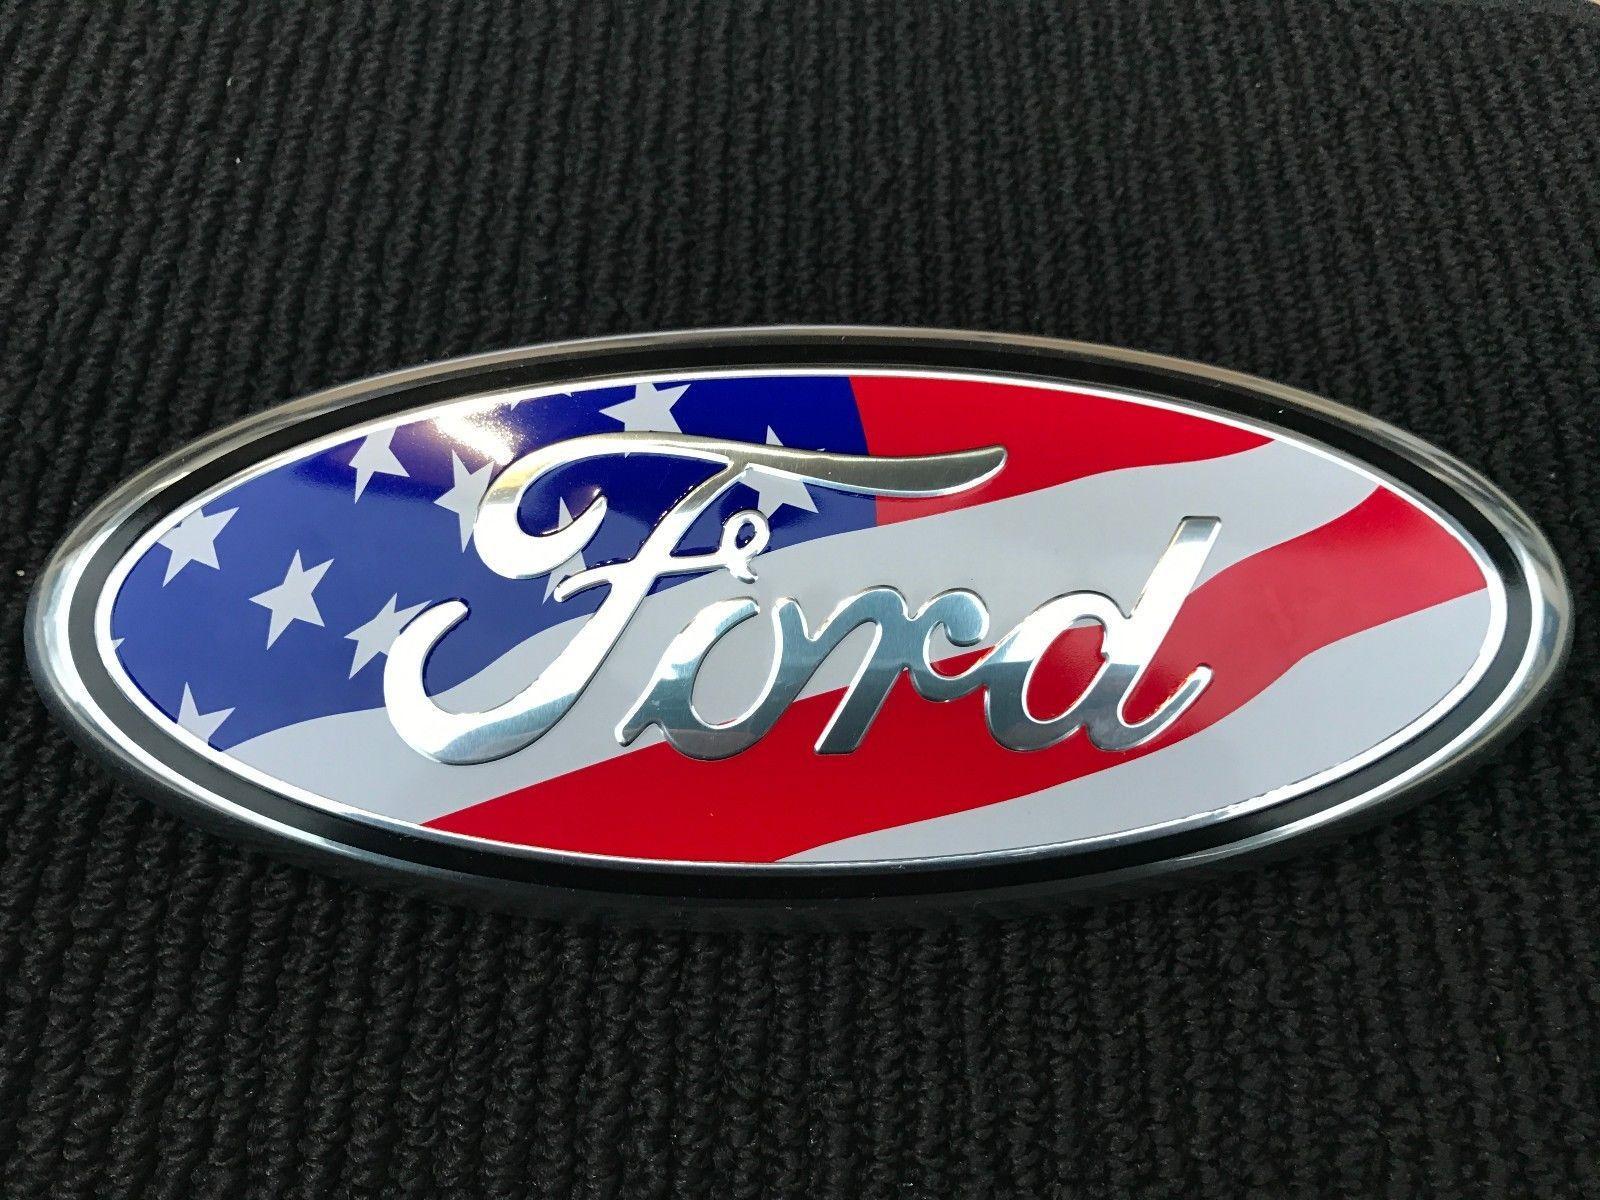 2014 Ford Logo - 2019 NEW 2004 2014 FORD F 150 USA FLAG FRONT GRILLE OR REAR TAILGATE ...